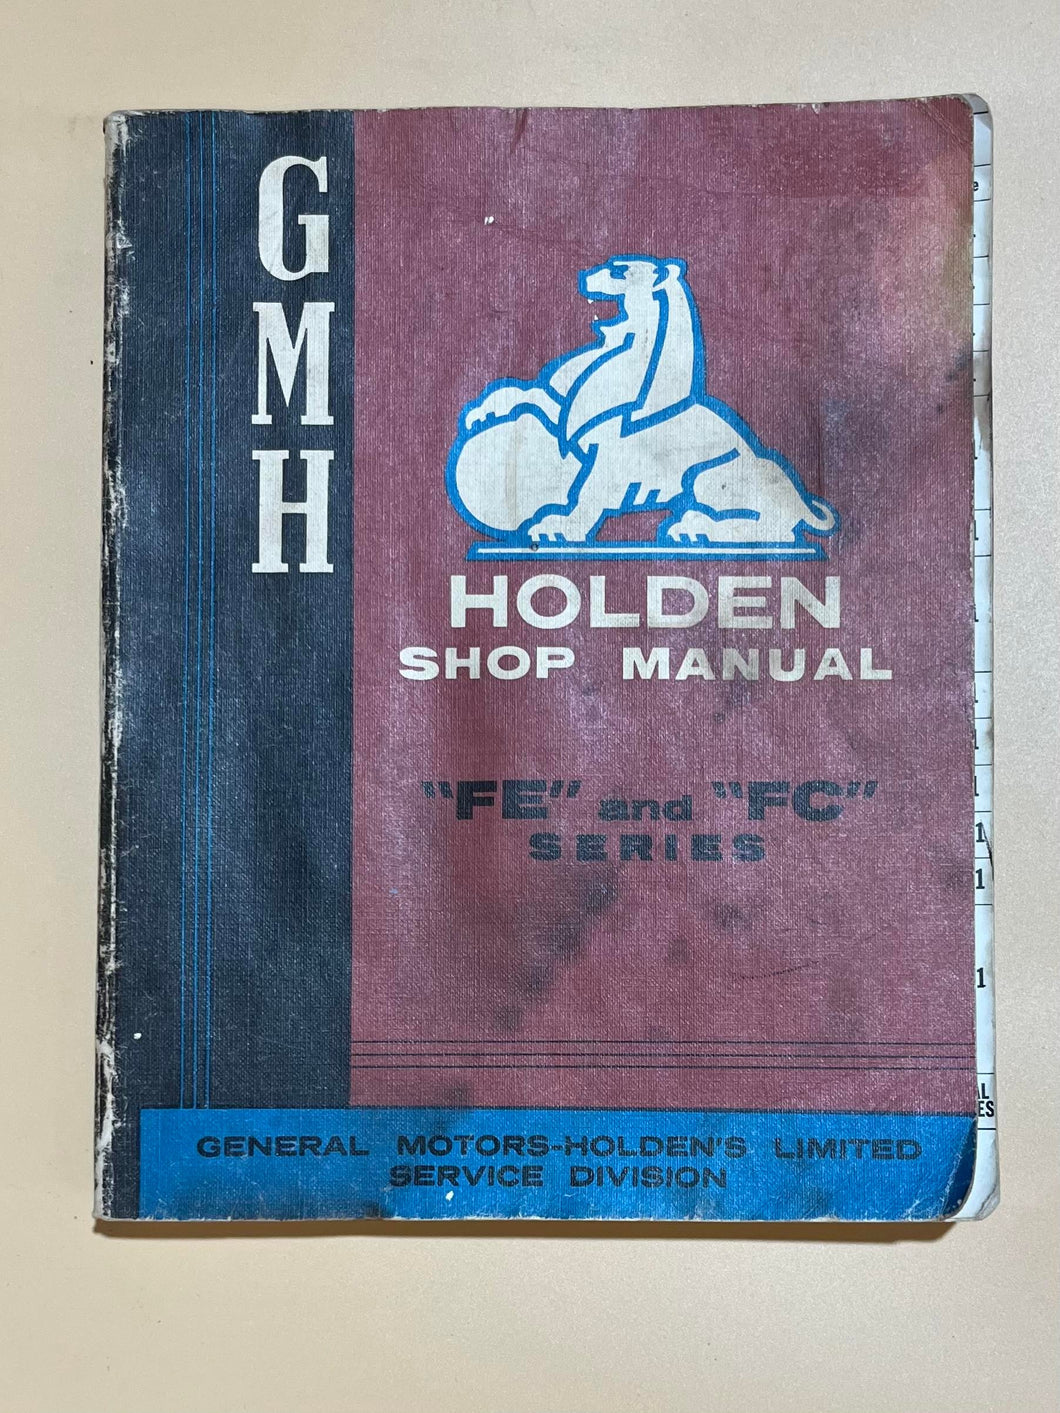 GMH Holden Shop Manual FE & FC Series